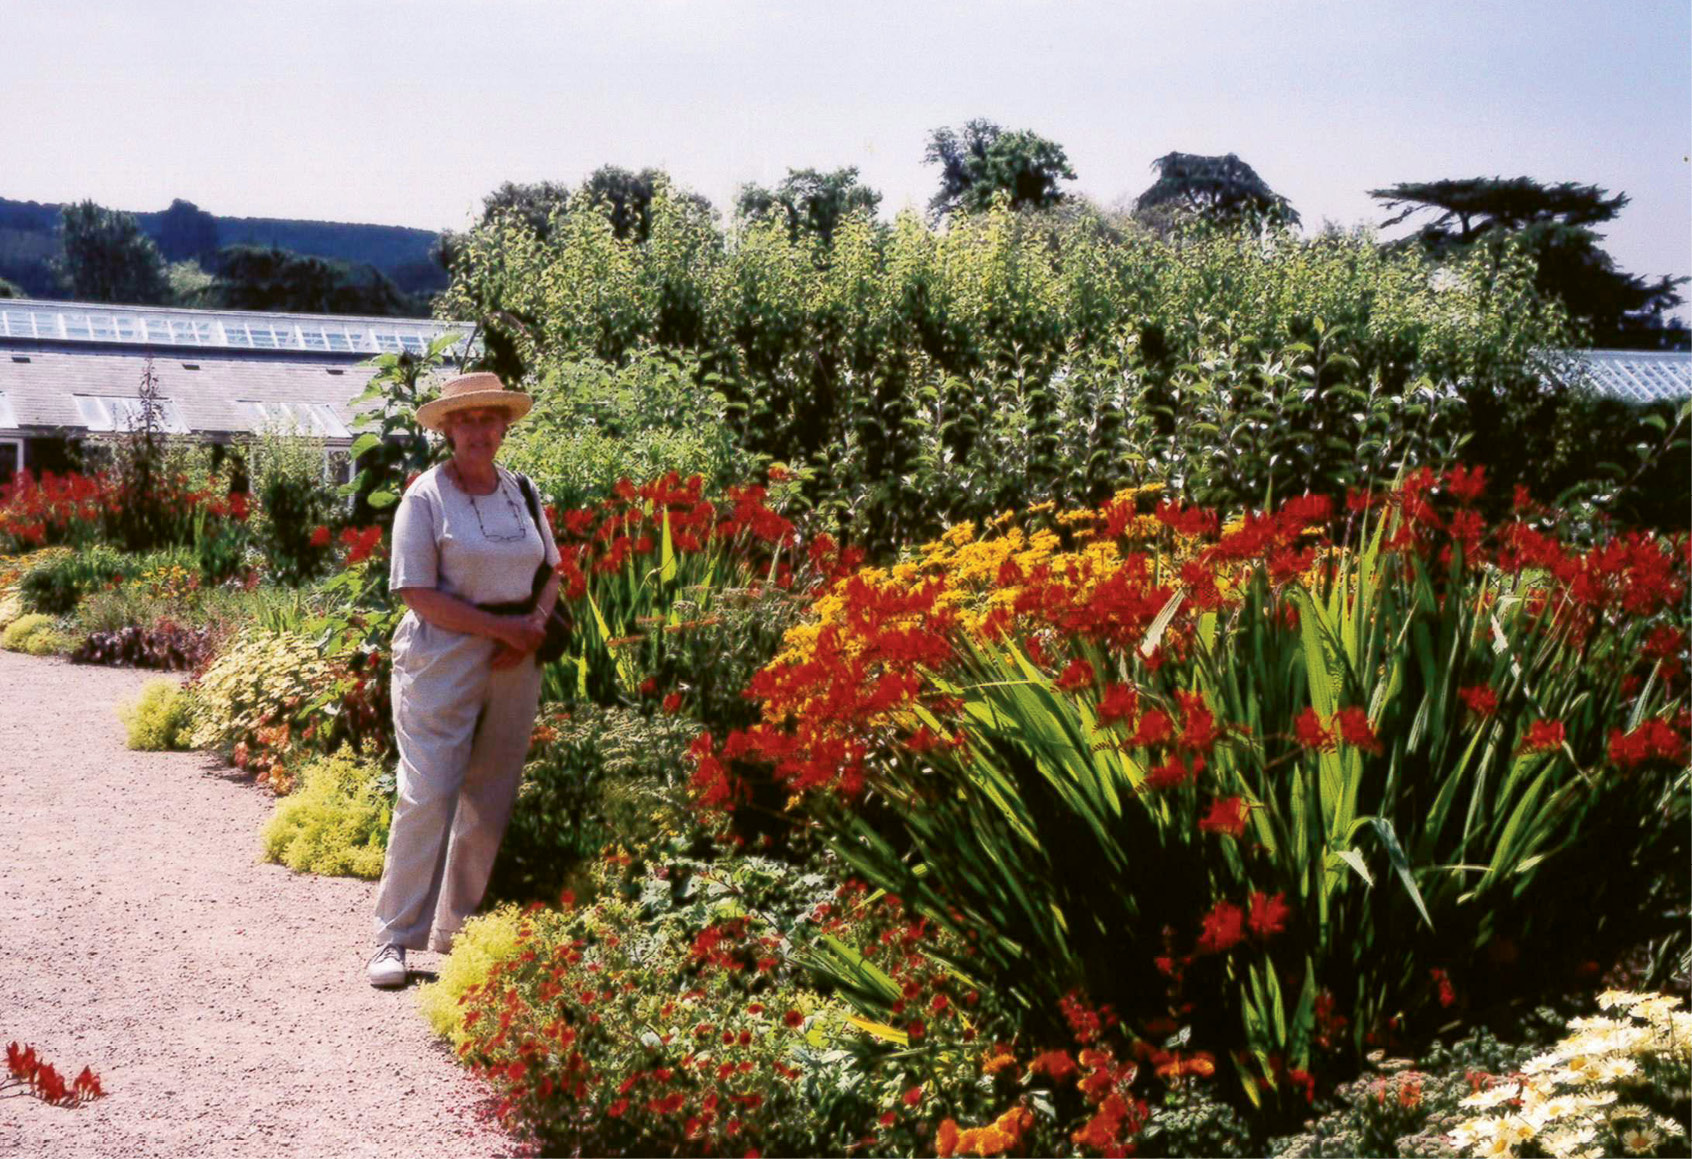 STUDY ABROAD: During the summer of 2000, Patti and Peter rented an English cottage that served as home base for a tour of gardens in Britain, including one in West Sussex